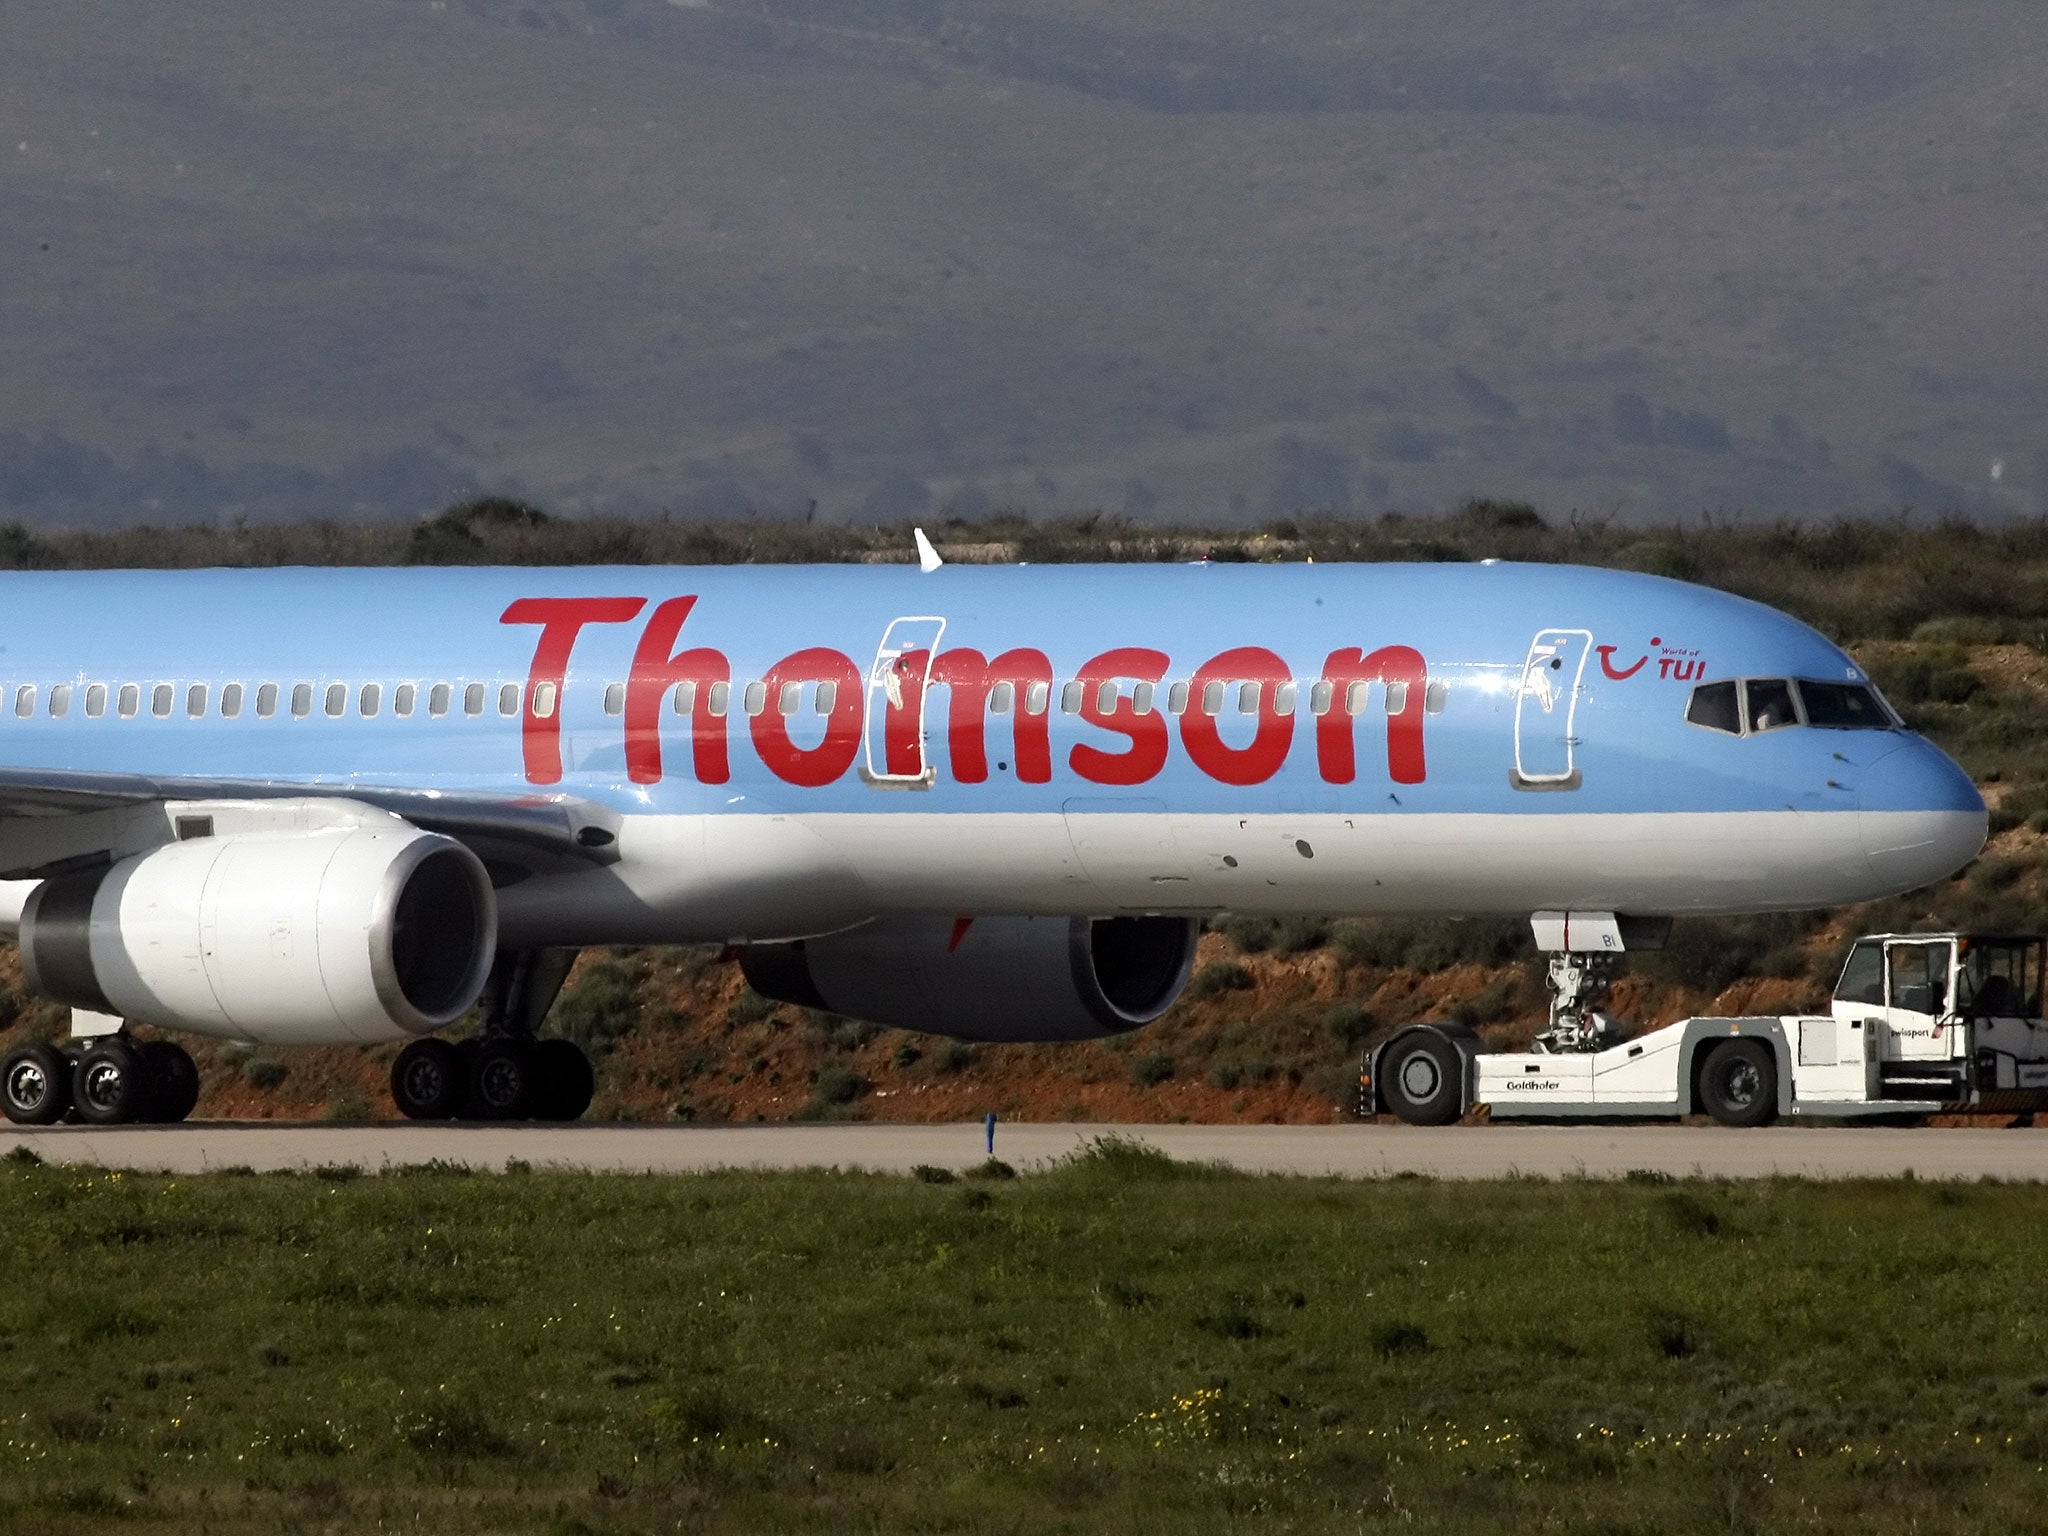 The Thomson plane reportedly evaded the missile in August